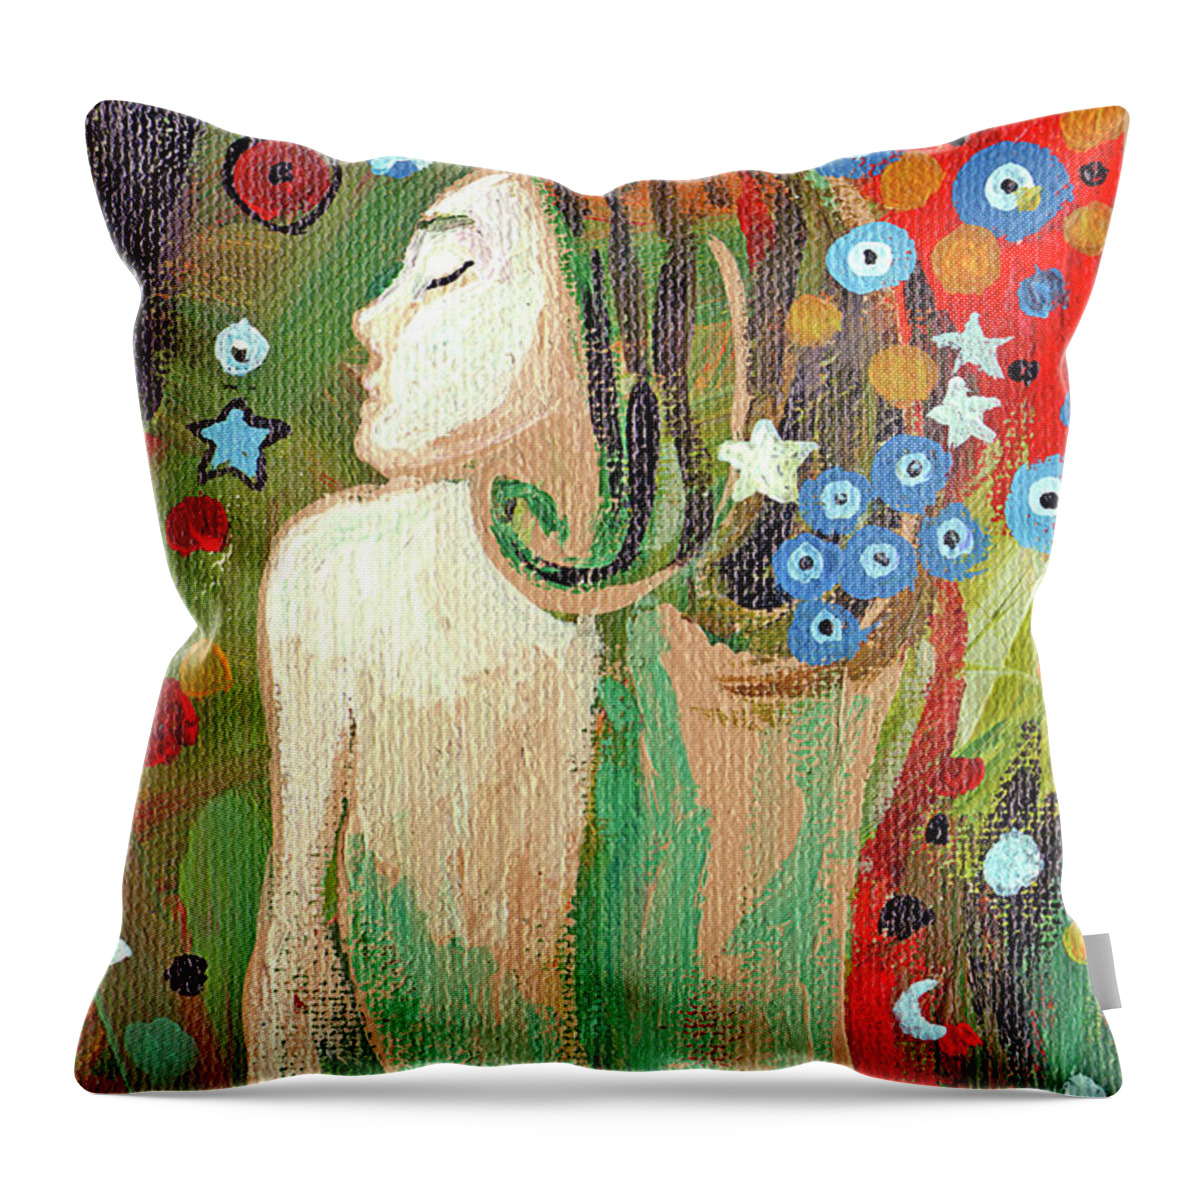 Afterkllimt Throw Pillow featuring the painting After Klimt by Genevieve Esson